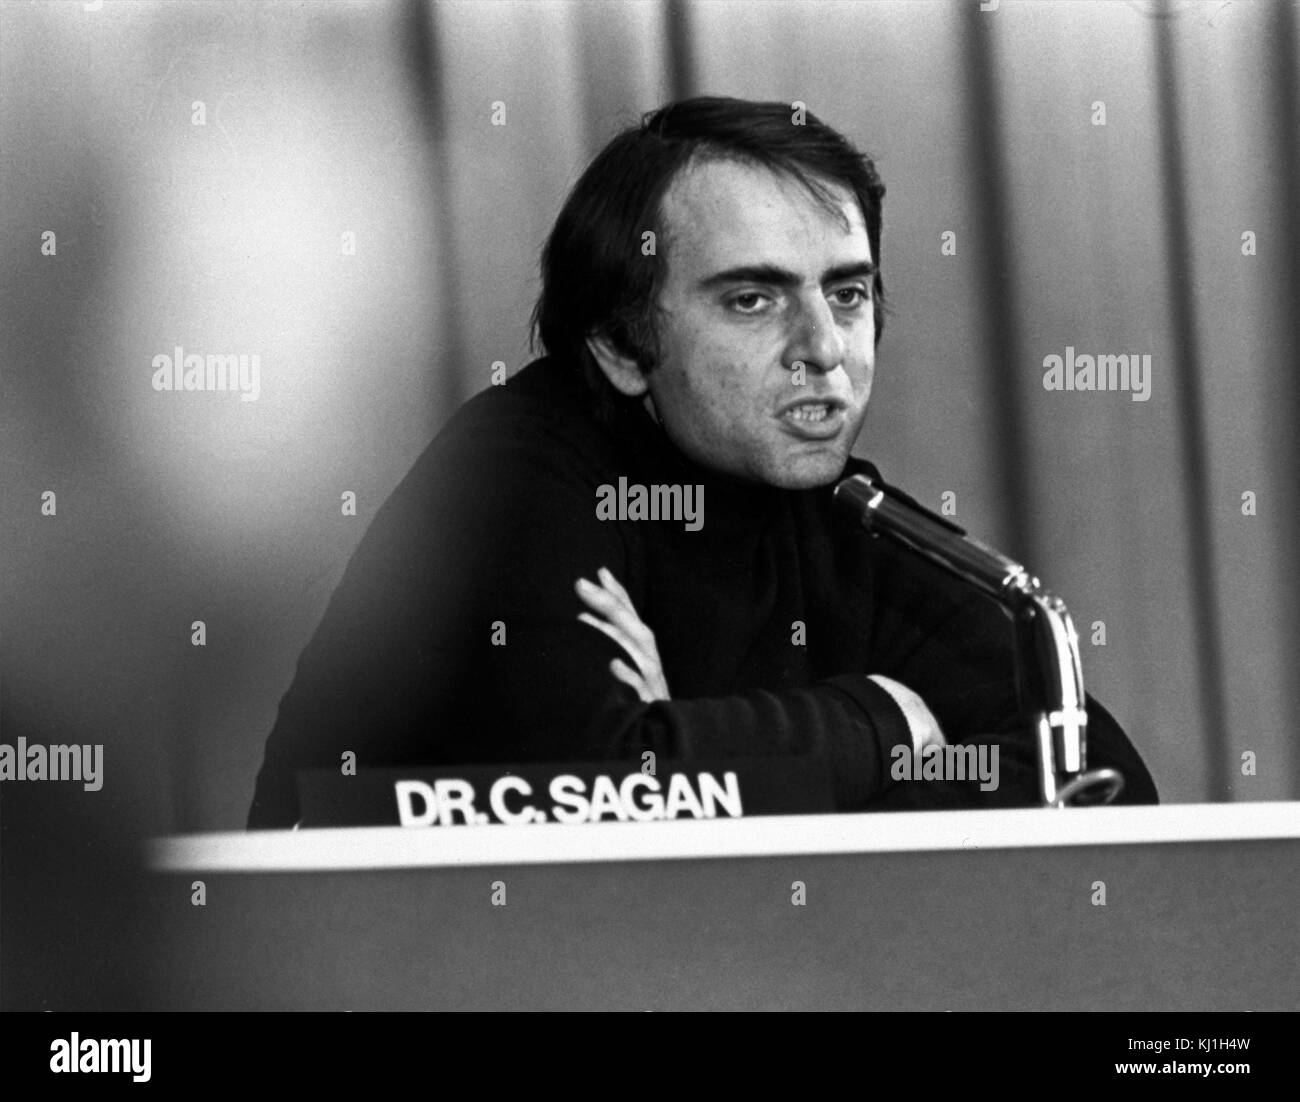 Carl Edward Sagan (1934 – 1996) was an American astronomer, cosmologist, astrophysicist, astrobiologist, author, science populariser, and science communicator in astronomy and other natural sciences. Stock Photo